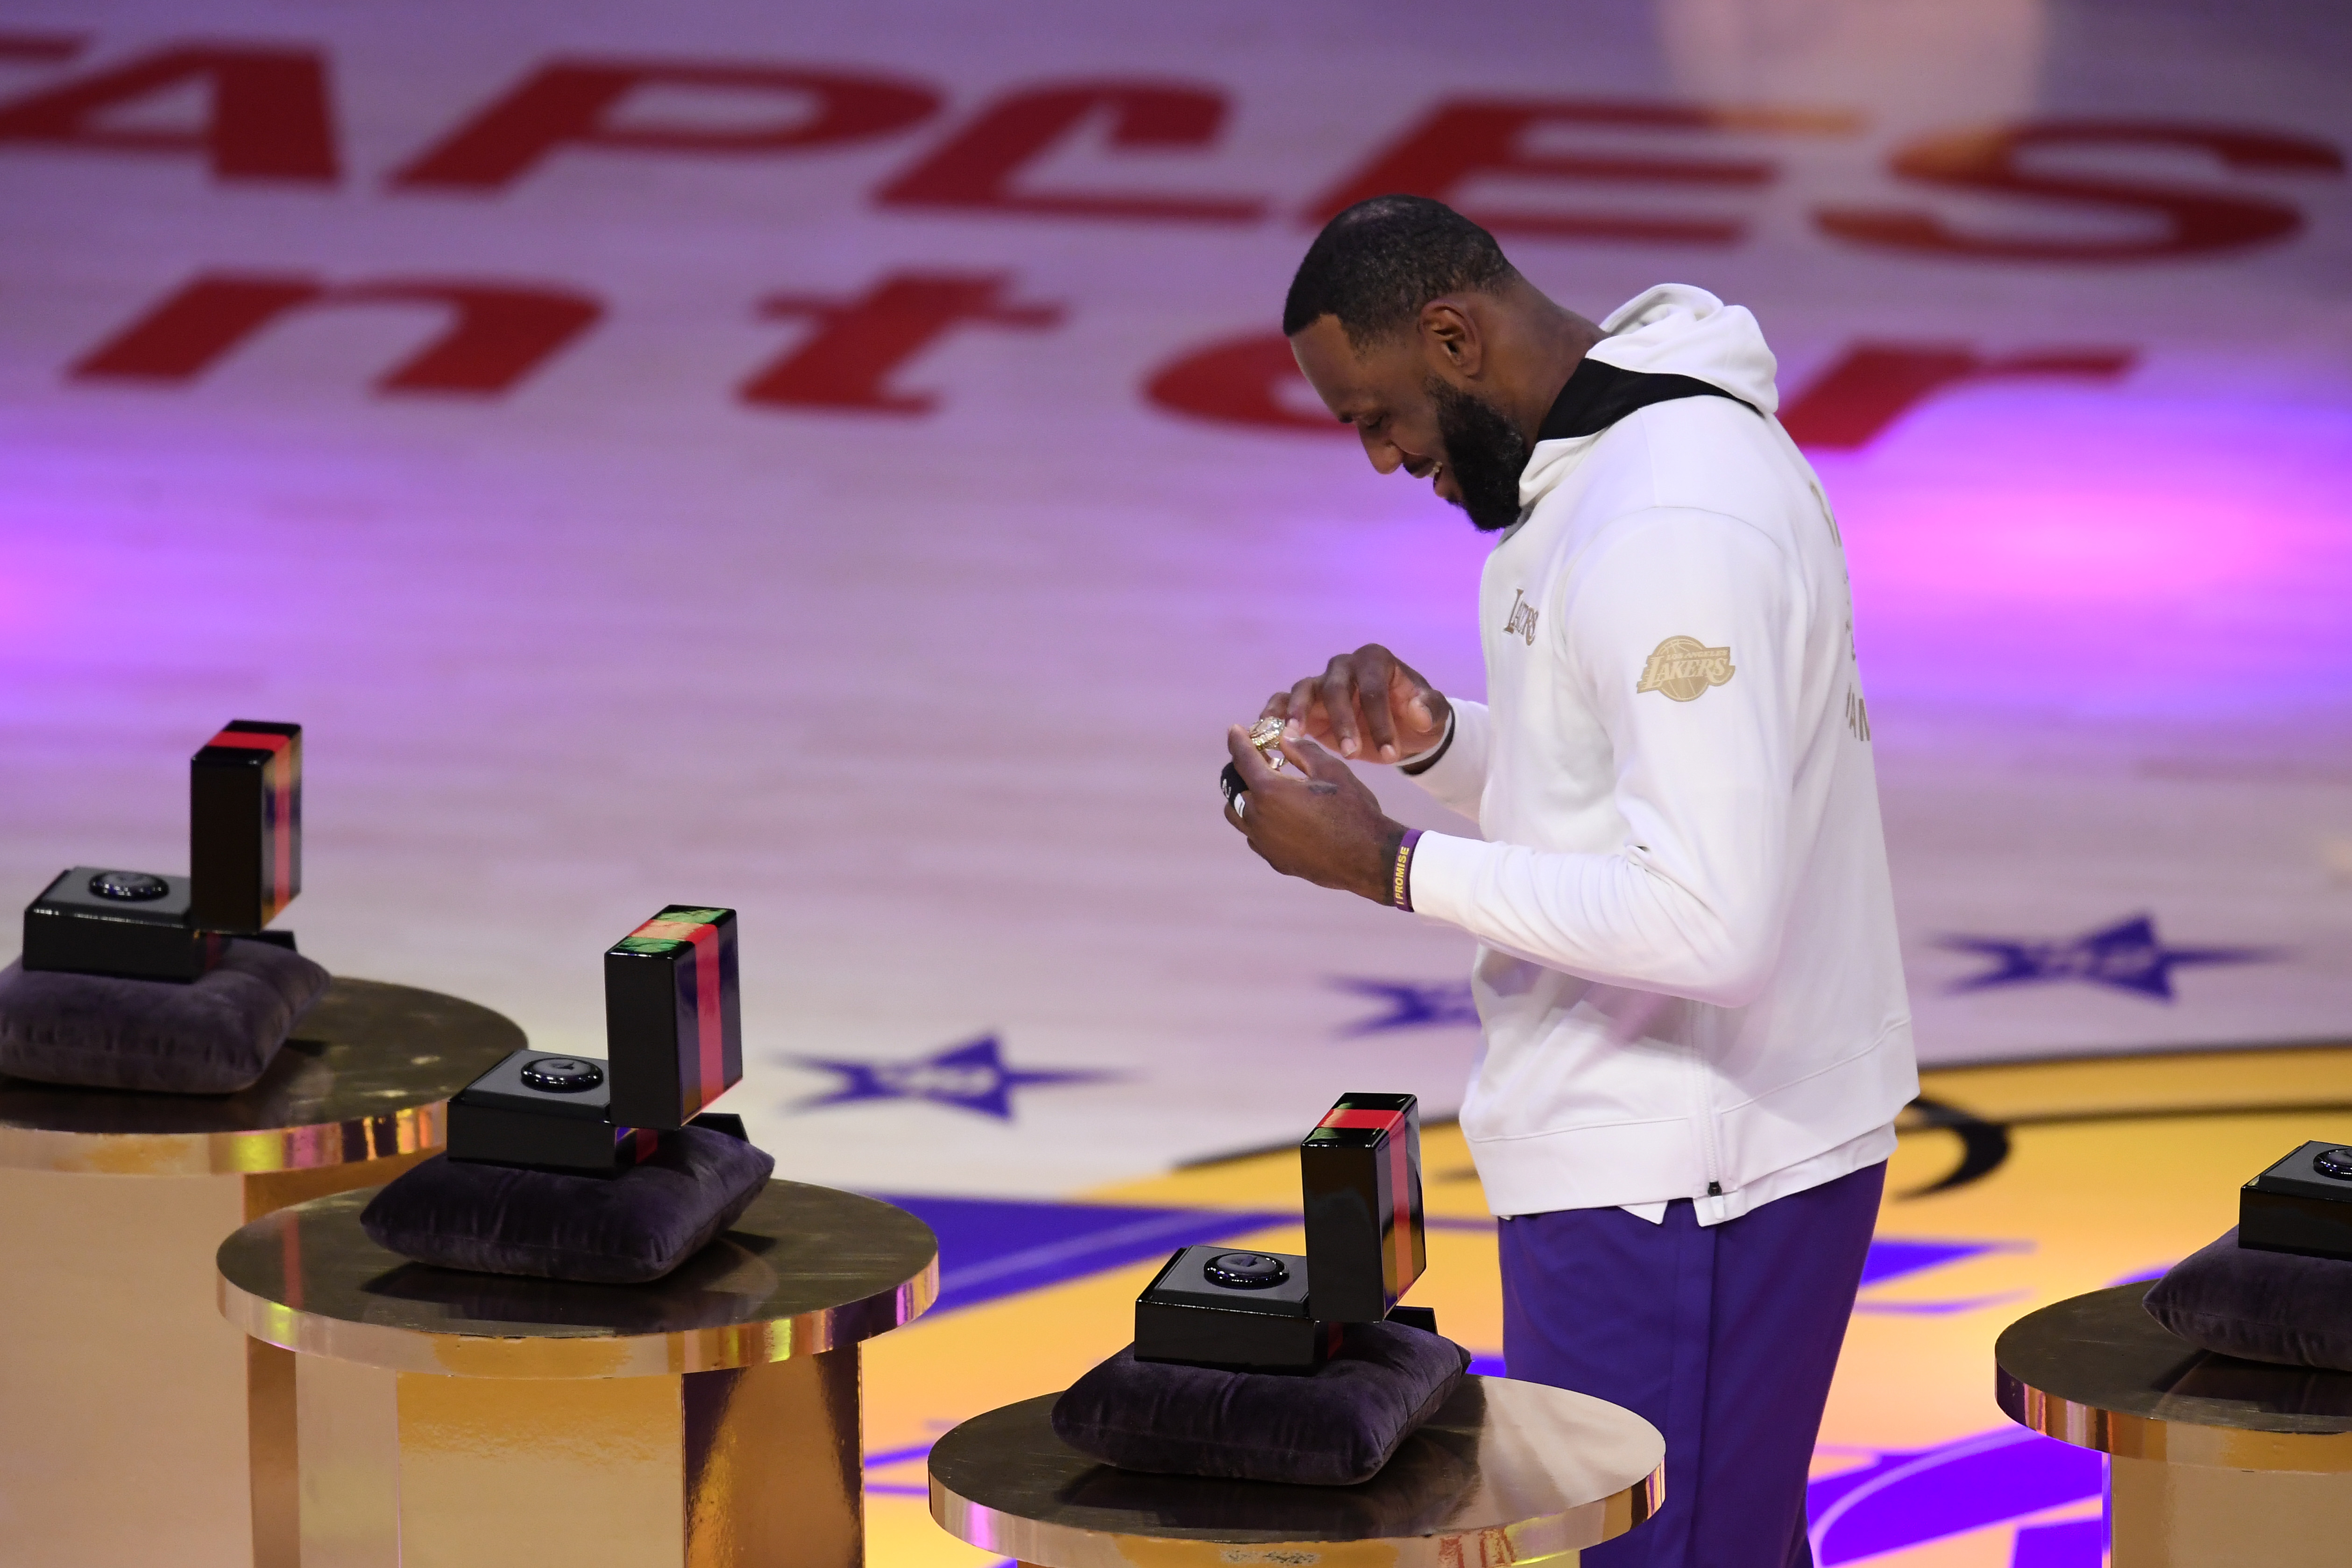 Lakers 2020 Championship Rings Pay Tribute to Kobe Bryant